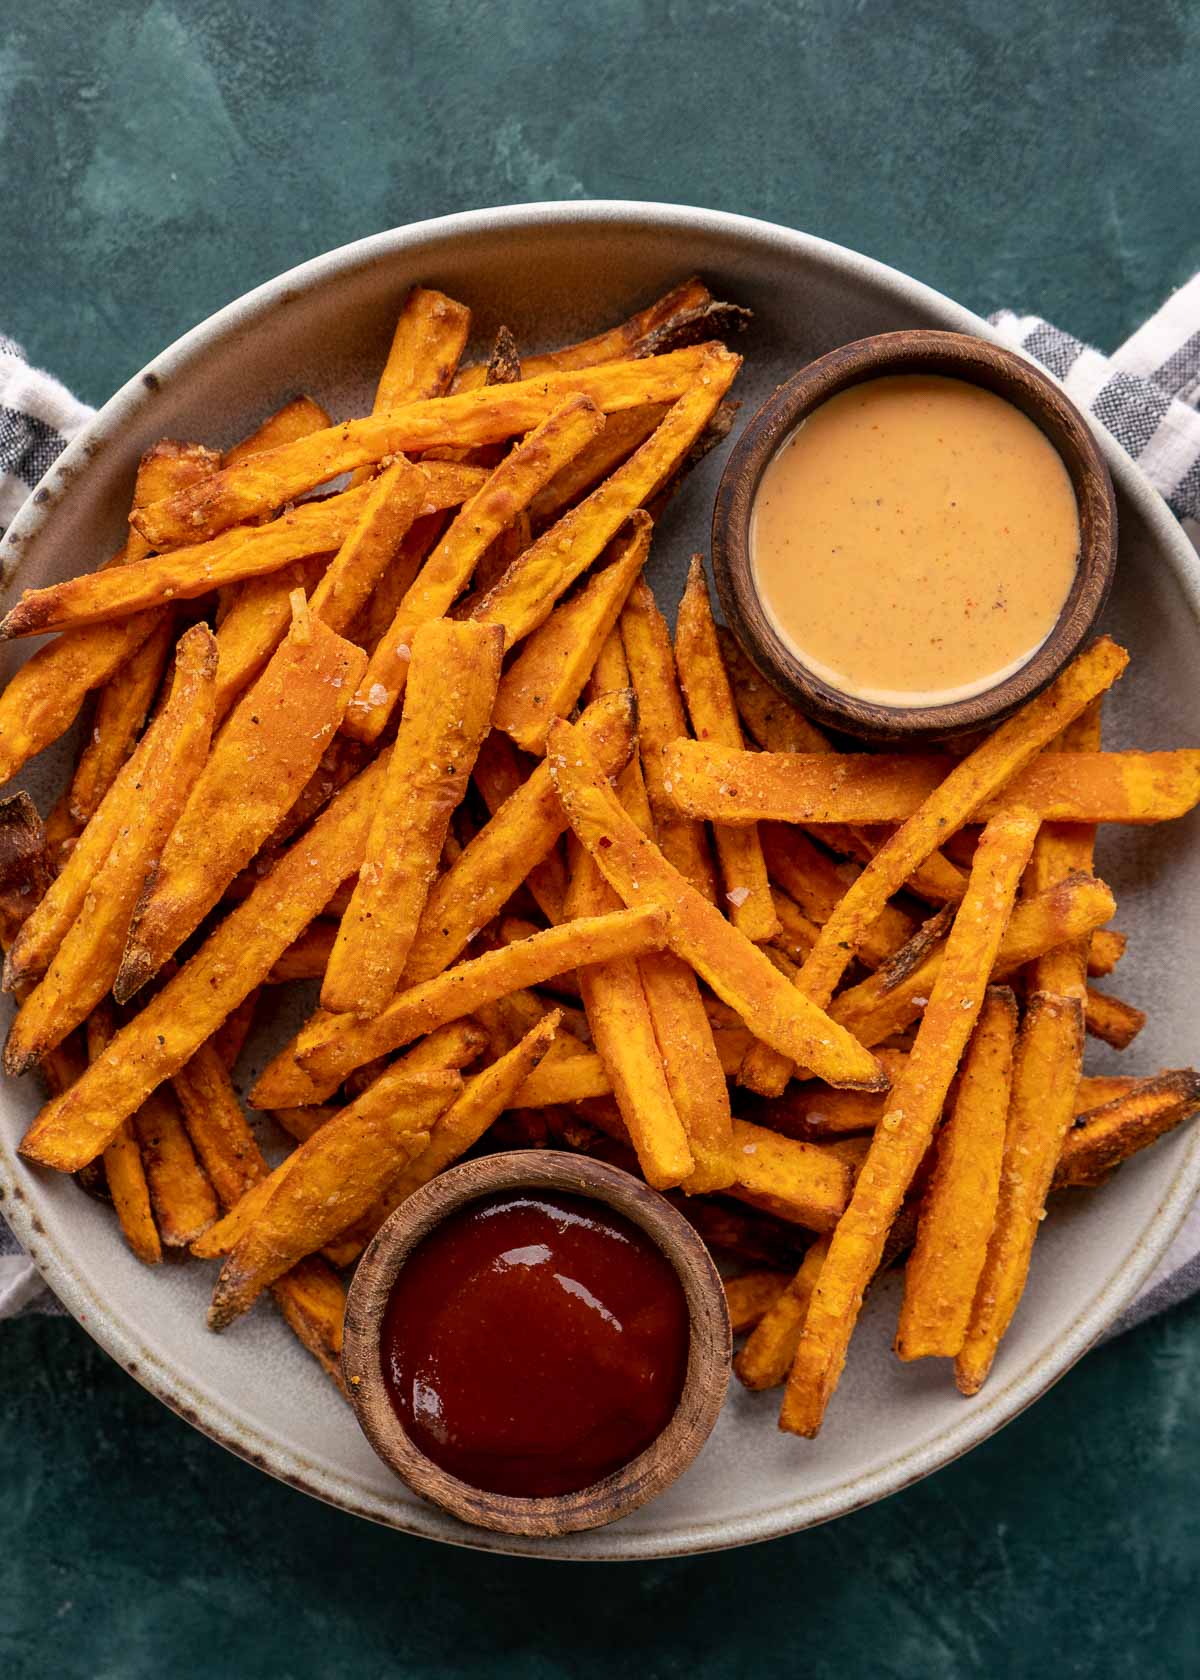 These Air Fryer Sweet Potato Fries are an easy, delicious, and healthier alternative to traditional French fries. These sweet potato fries only require a few ingredients and can be ready in 20 minutes or less!